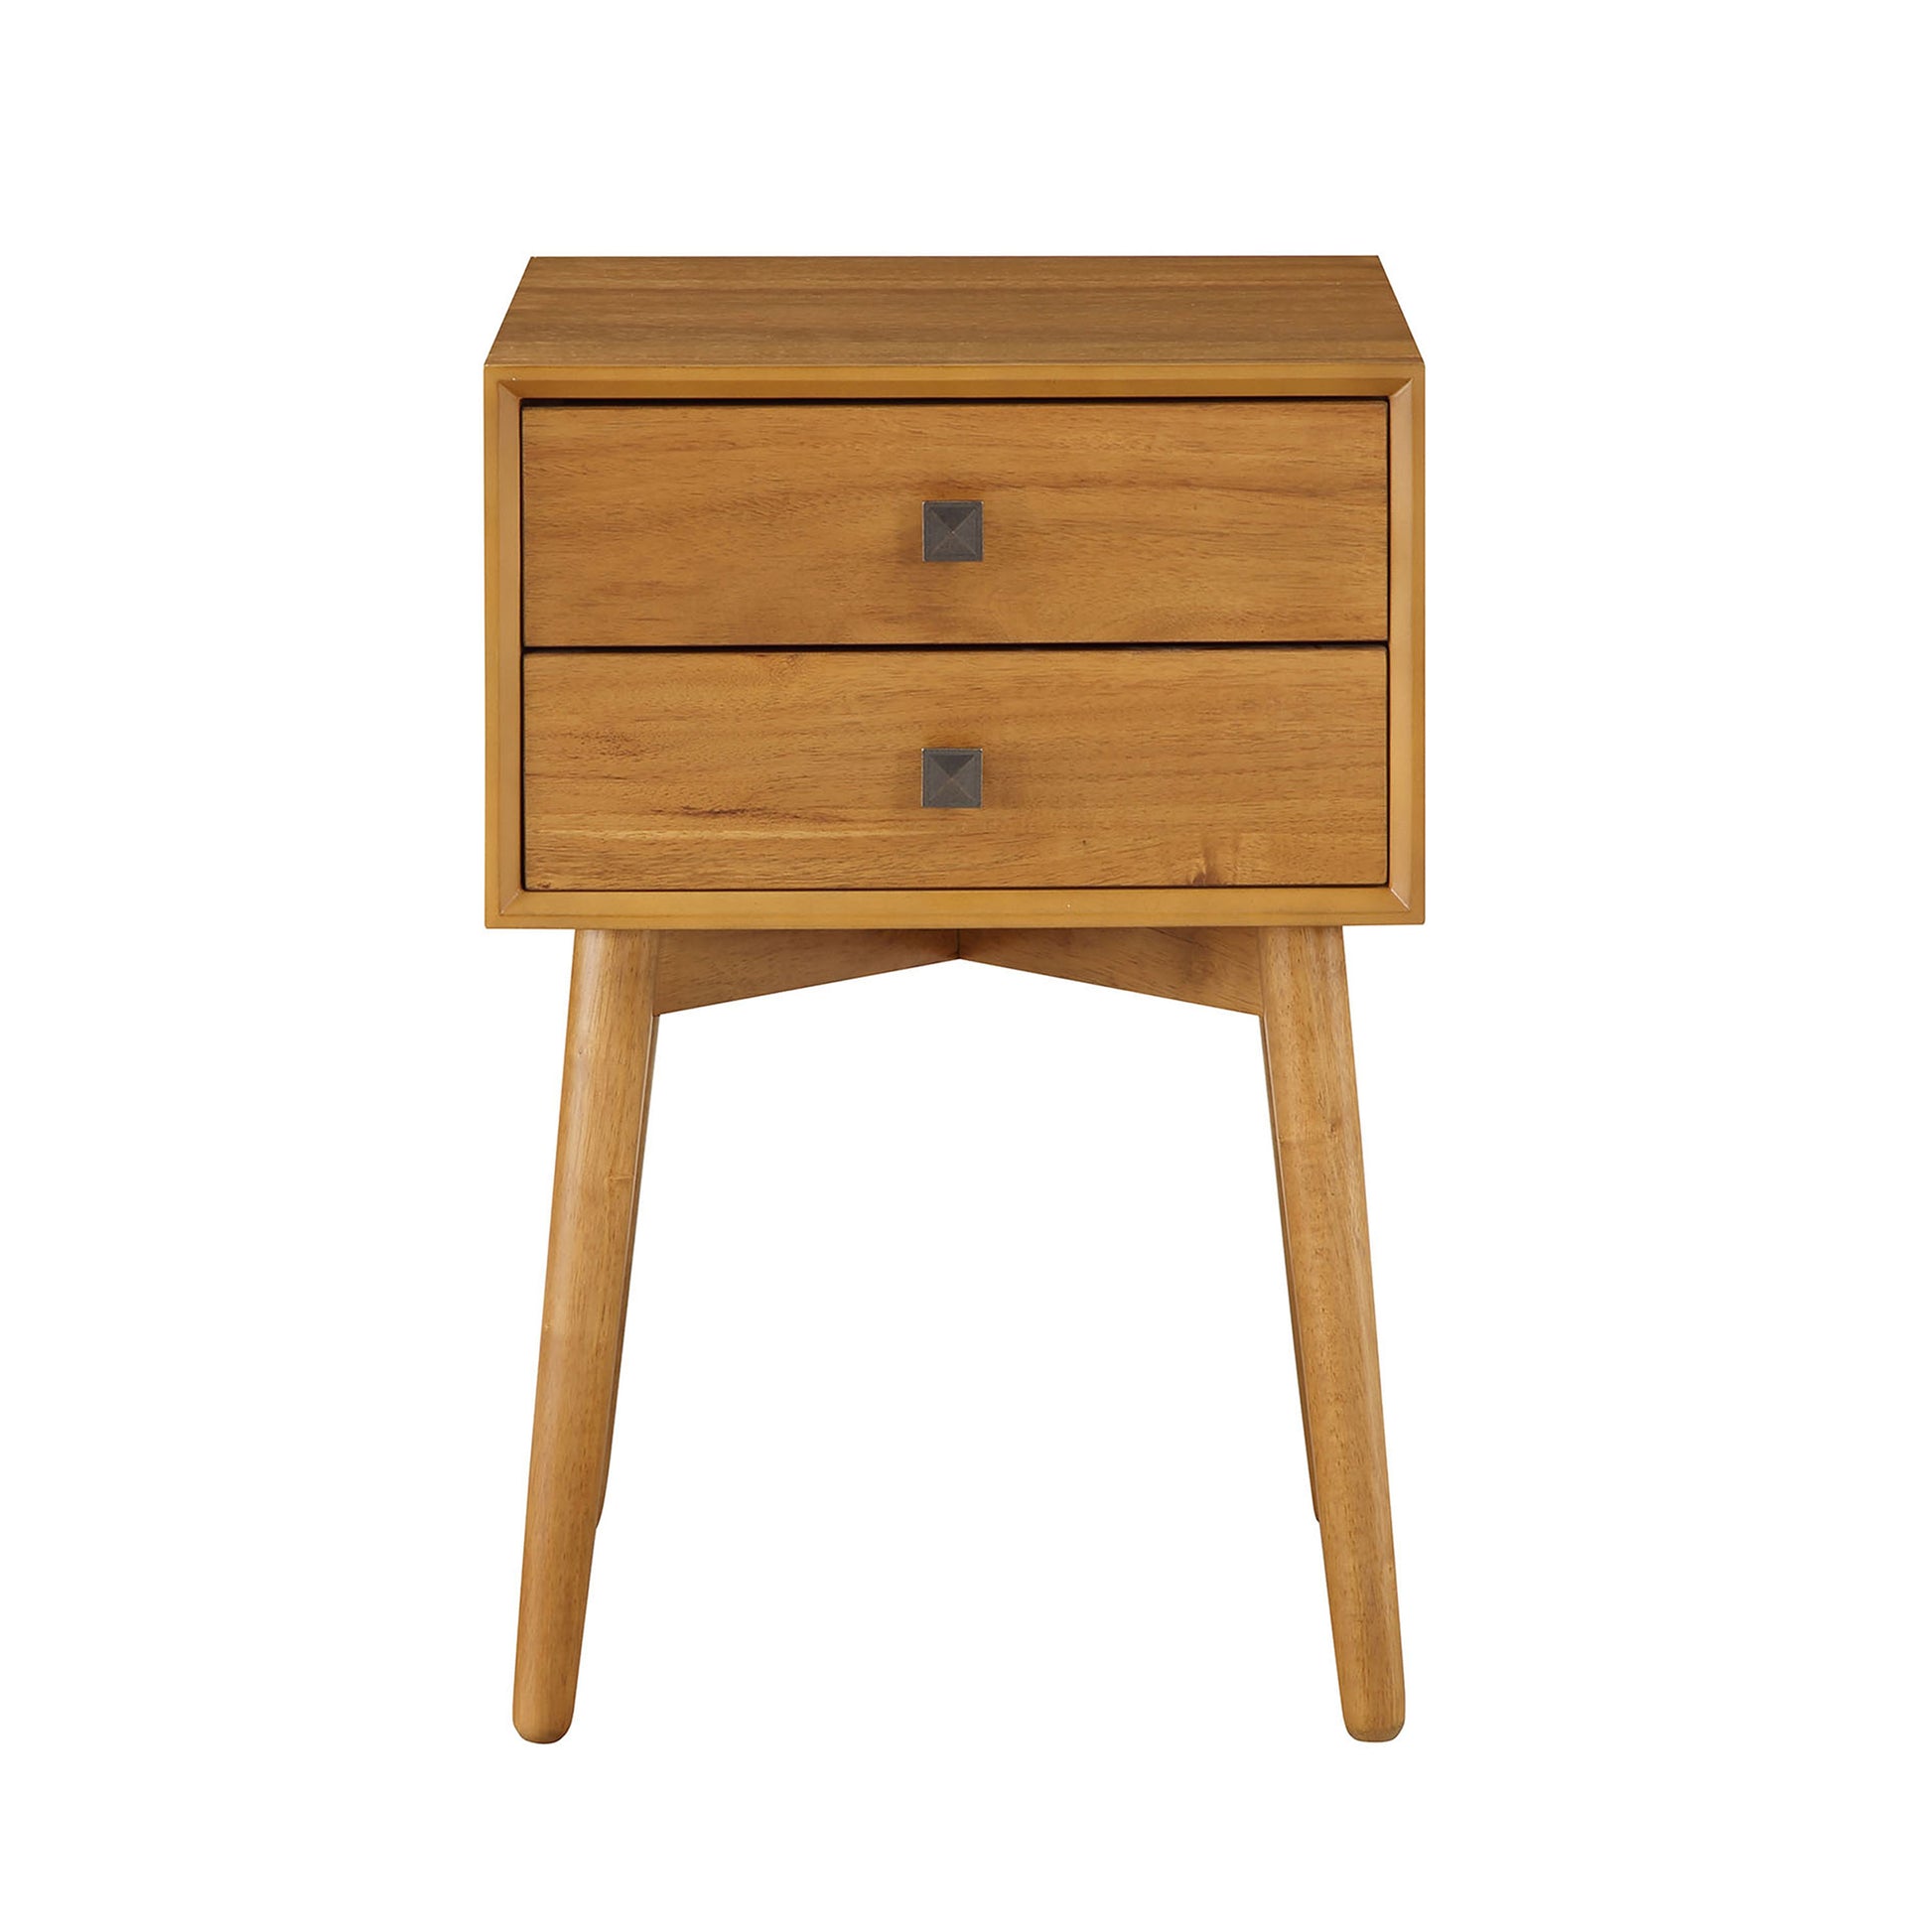 Front-facing modern light oak two-drawer compact nightstand with splayed legs on a white background